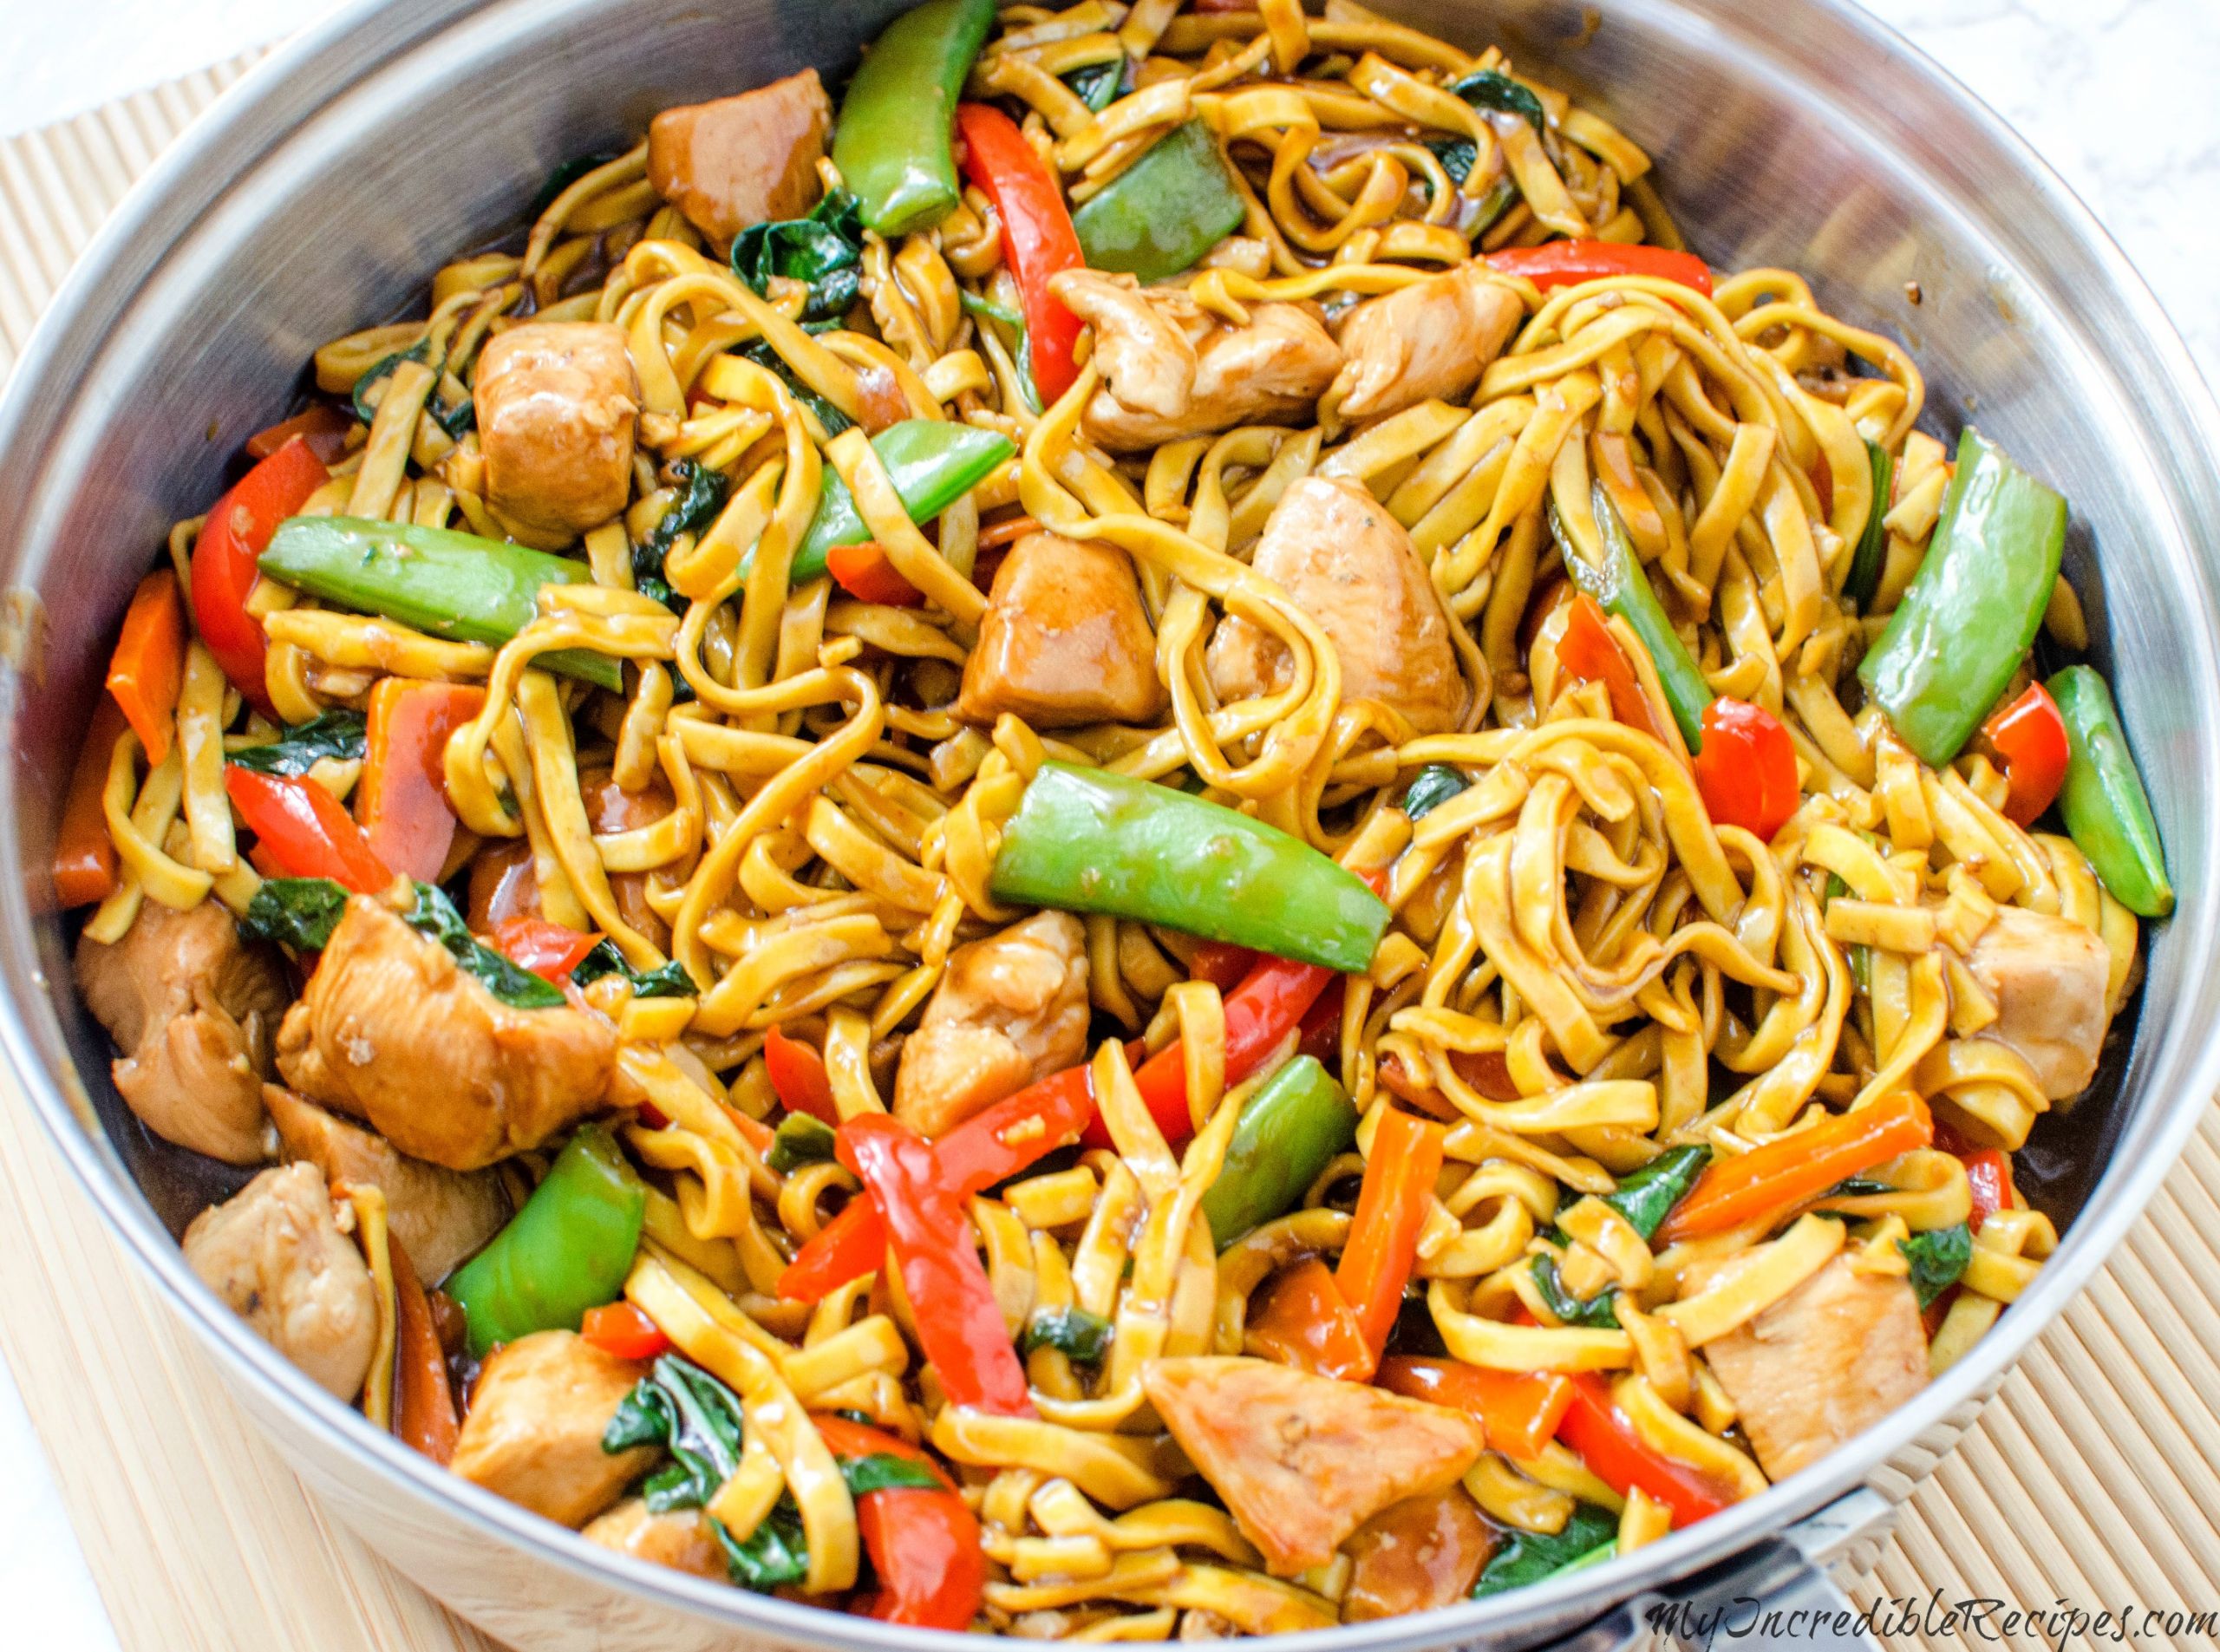 Homemade Lo Mein Noodles
 Chicken Lo Mein – Homemade Takeout Style